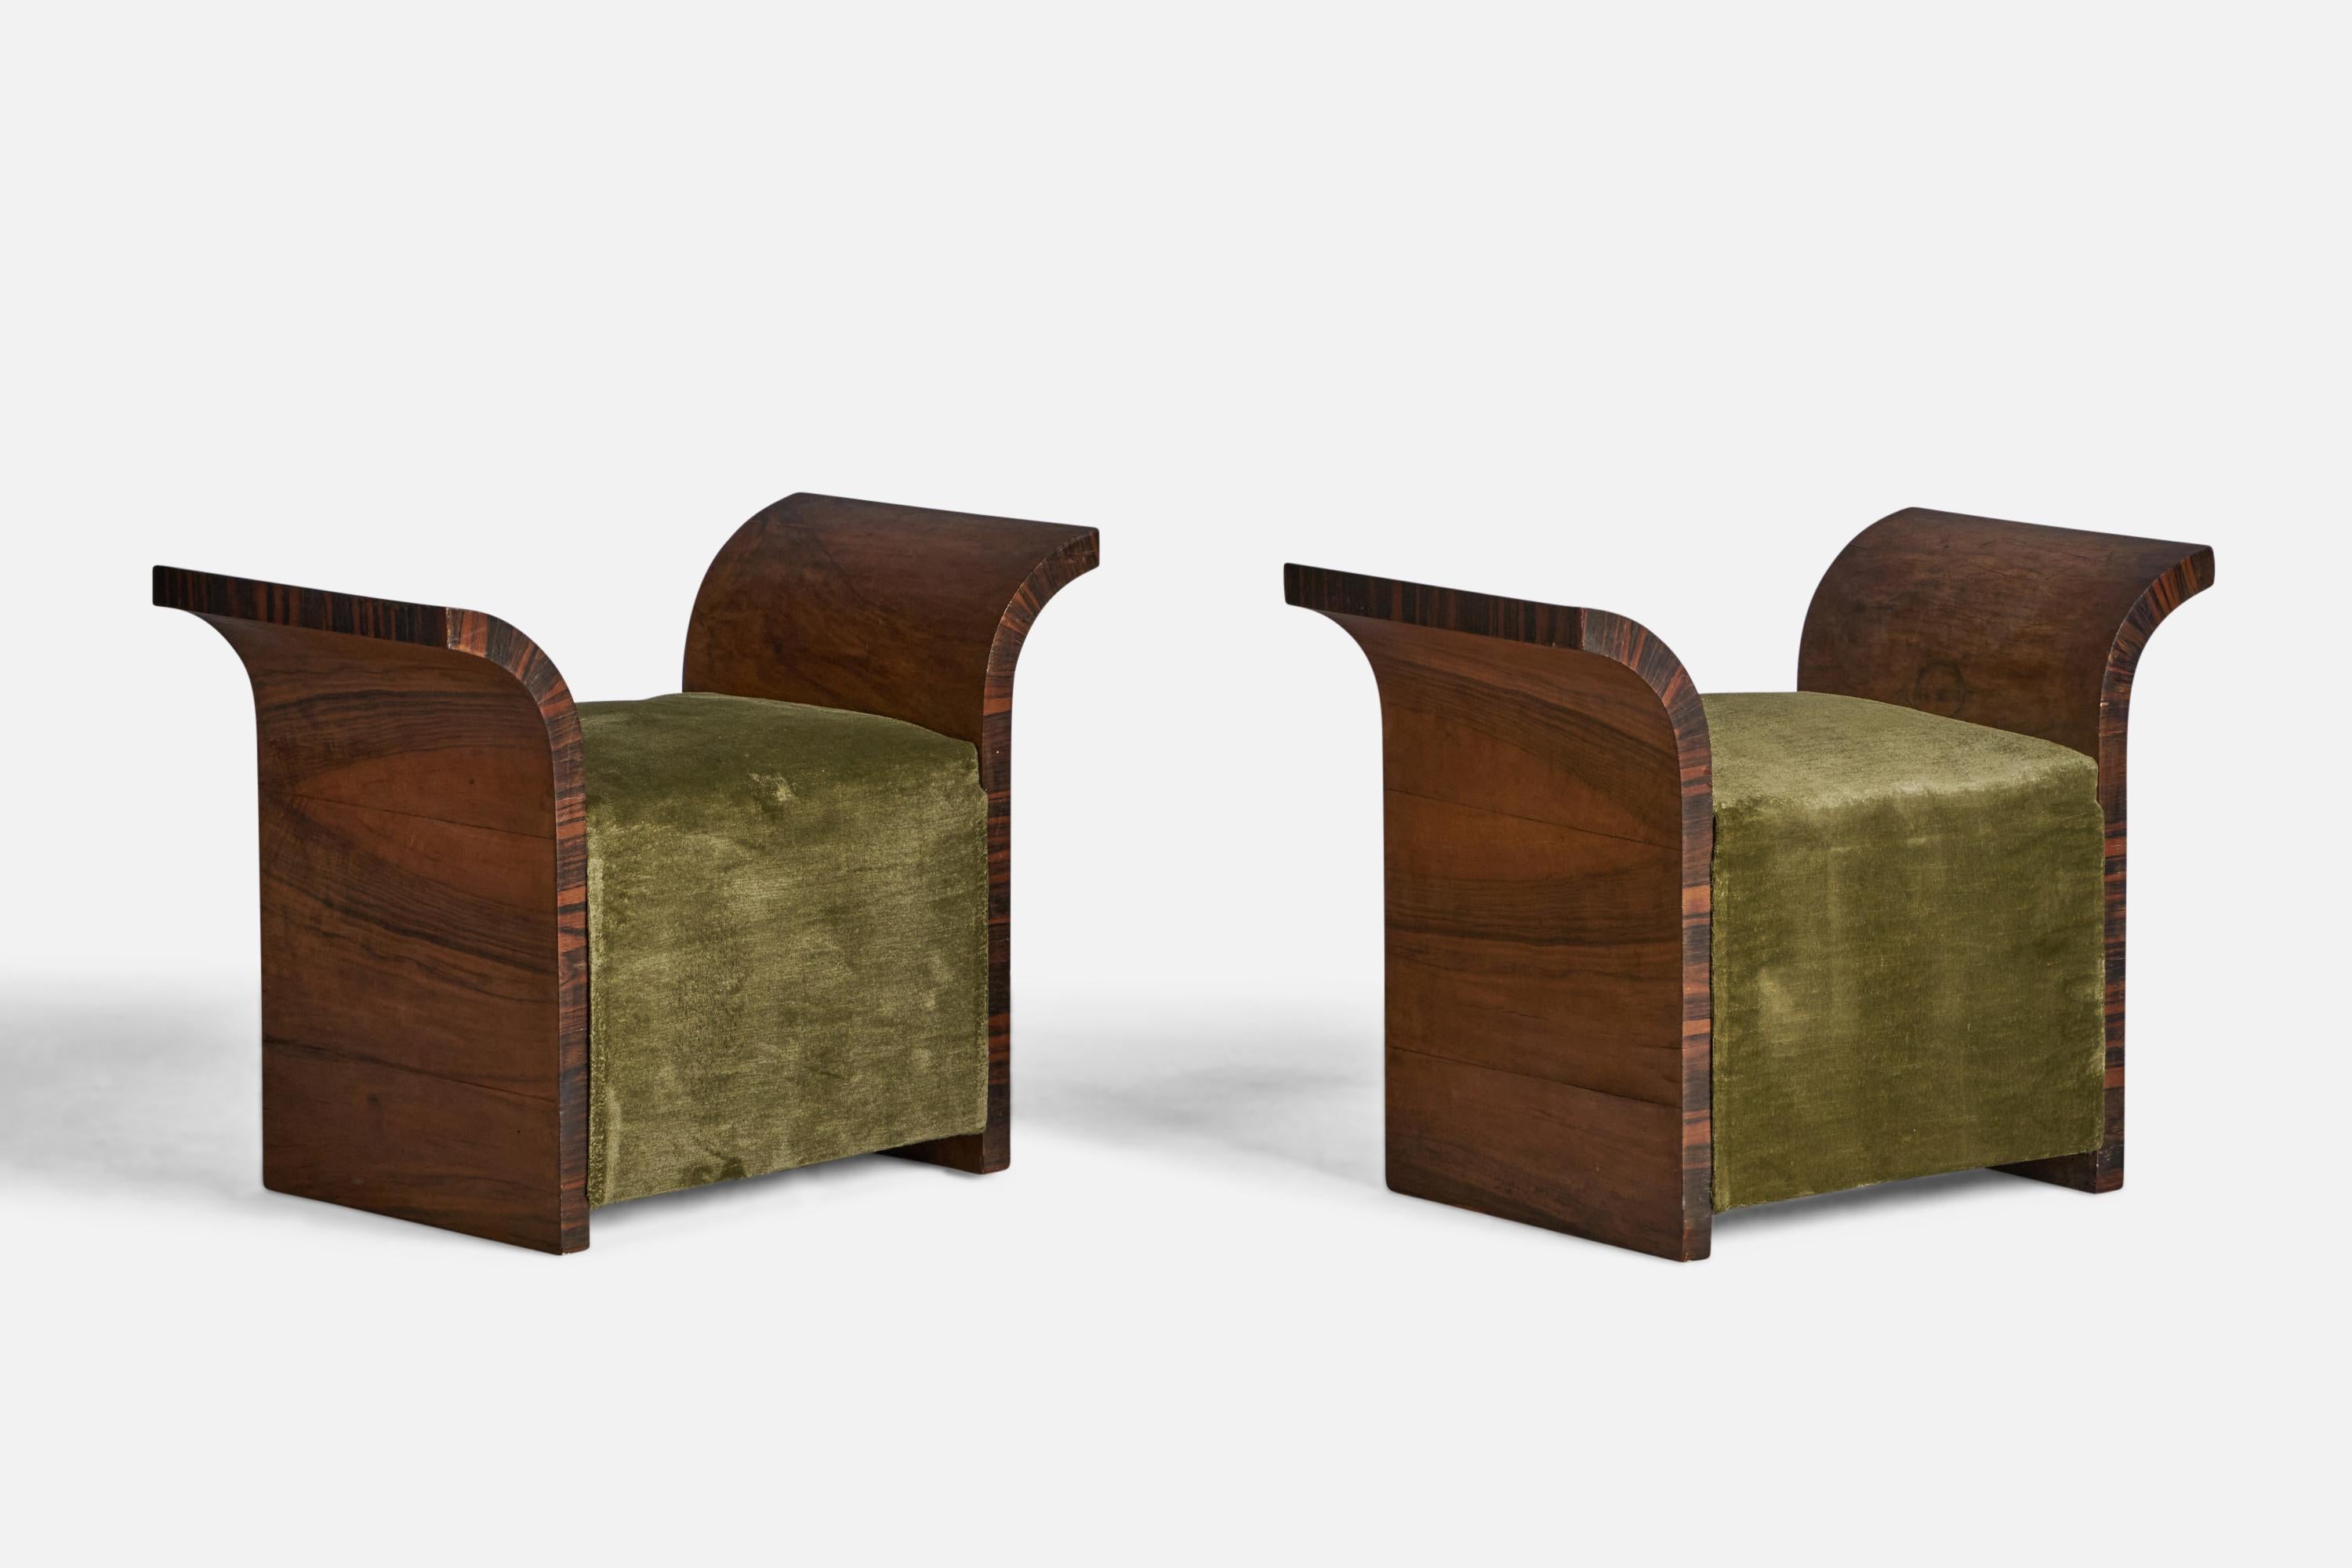 A pair of rosewood and green velvet stools, designed and produced in Italy, 1930s
Reupholstered in brand new high-end velvet.